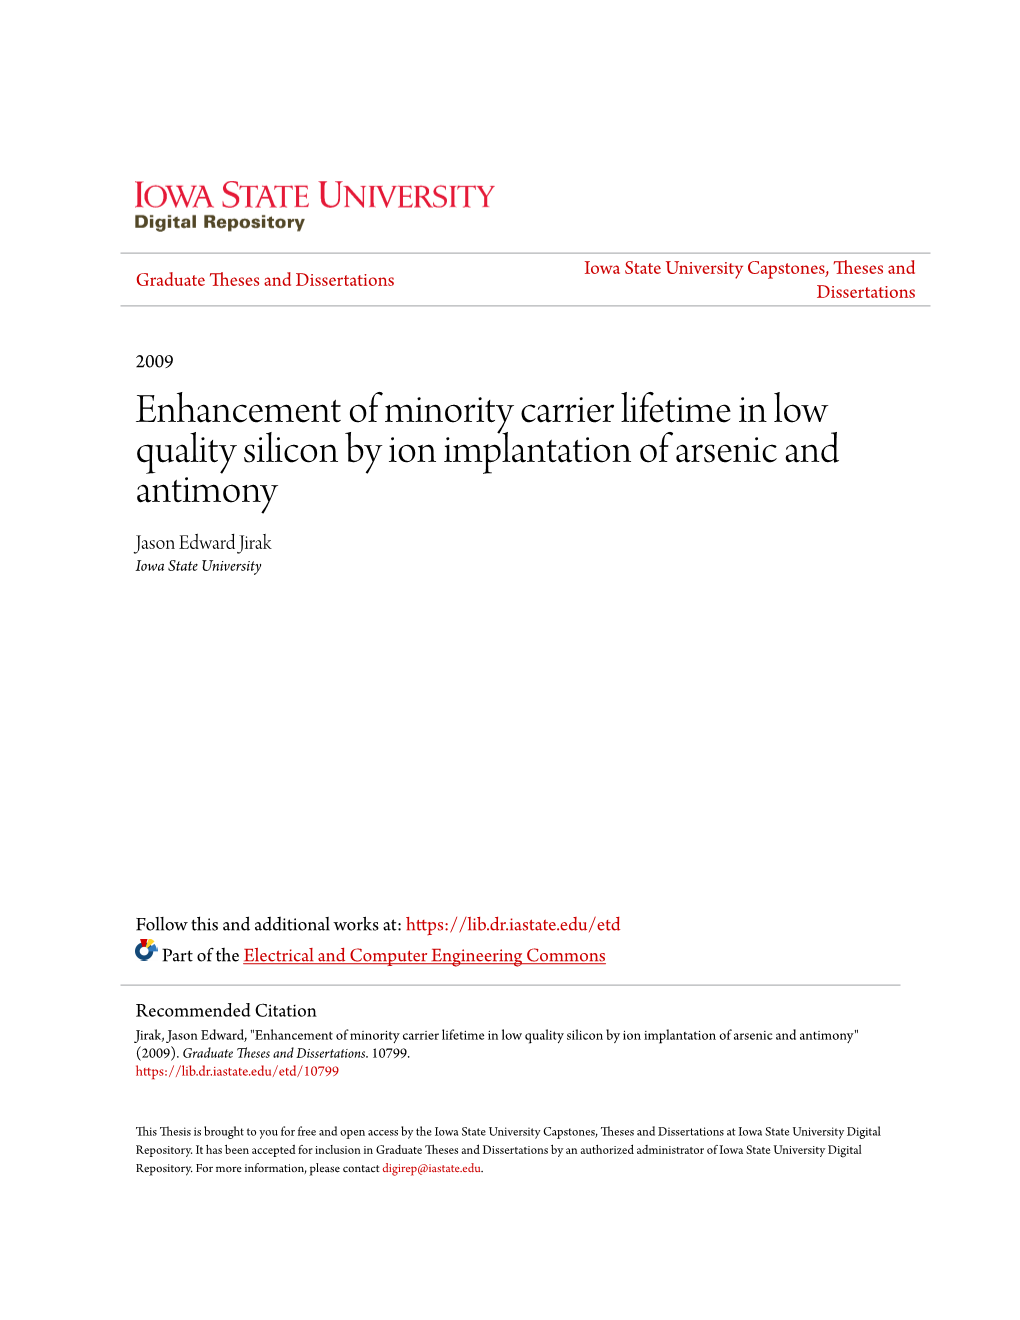 Enhancement of Minority Carrier Lifetime in Low Quality Silicon by Ion Implantation of Arsenic and Antimony Jason Edward Jirak Iowa State University